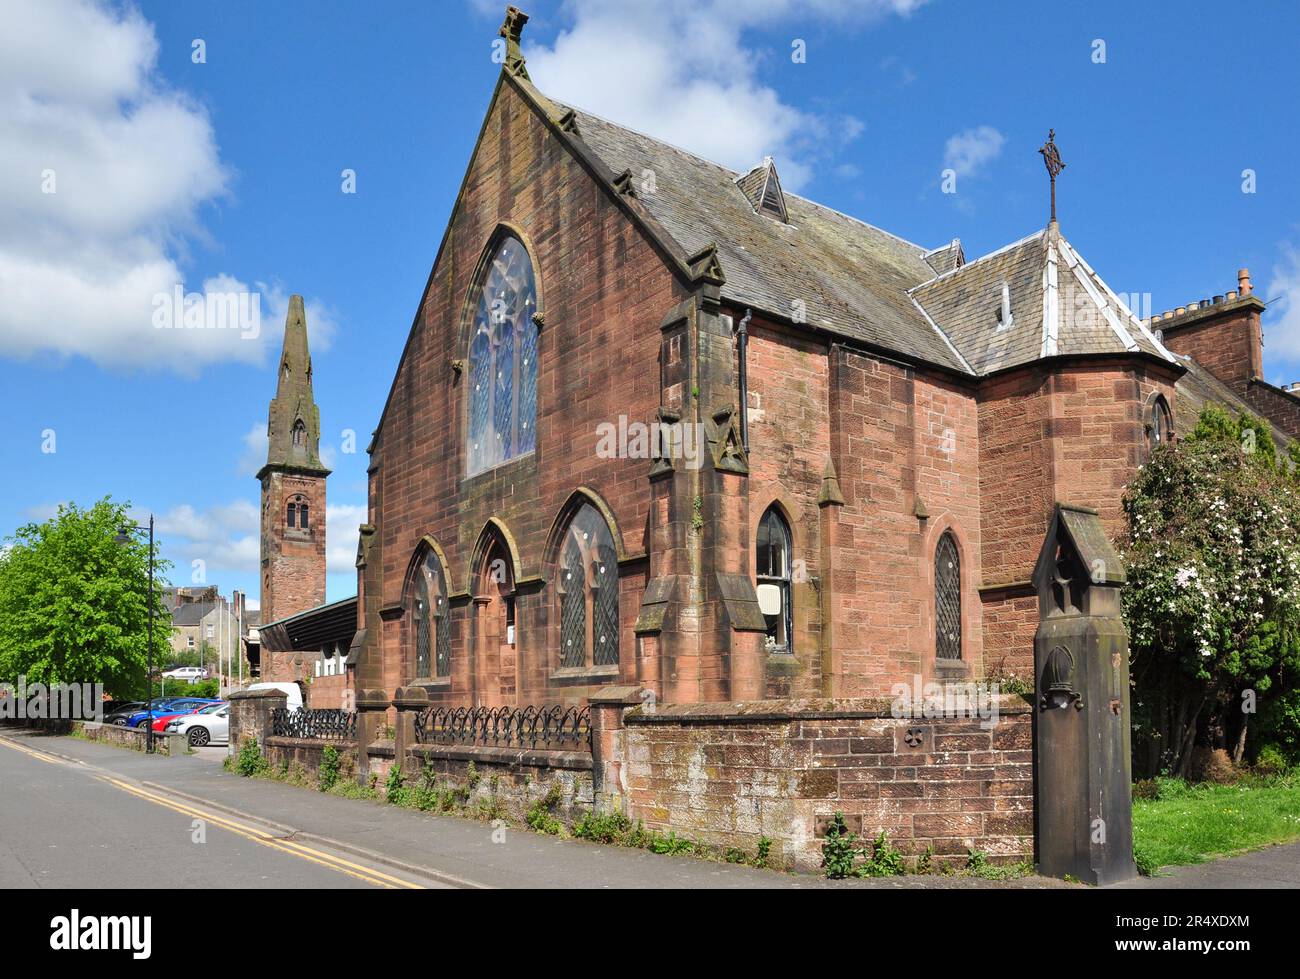 Church Hall in Brooke Street at St Andrew's Catholic Church with old tower in background, Dumfries, Dumfries and Galloway, Scotland, UK Stock Photo